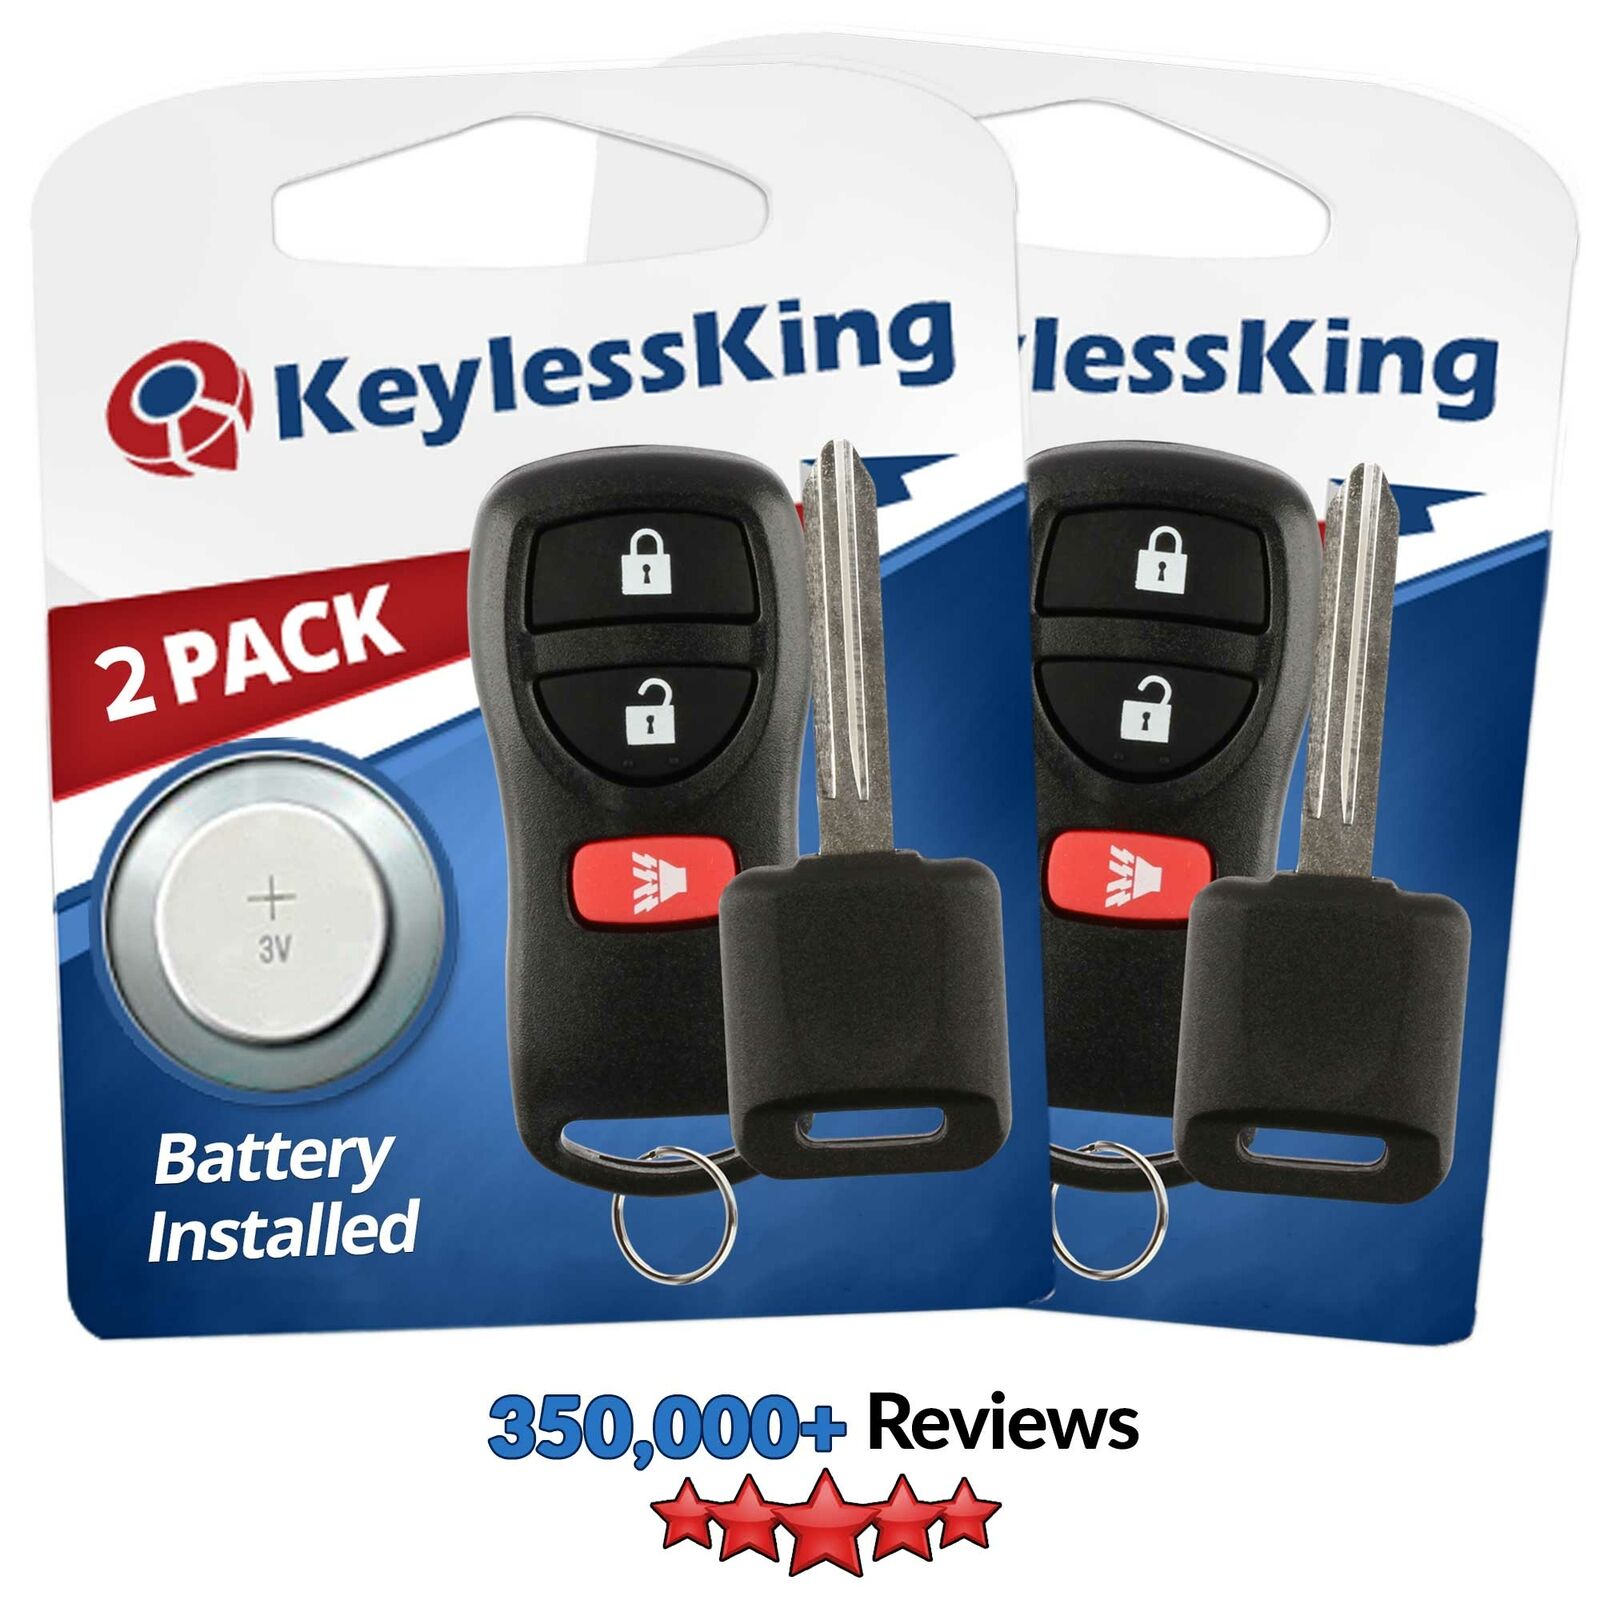 2 New 3b Replacement Keyless Entry Car Remote Fob with 46 Chip Key for Kbrastu15